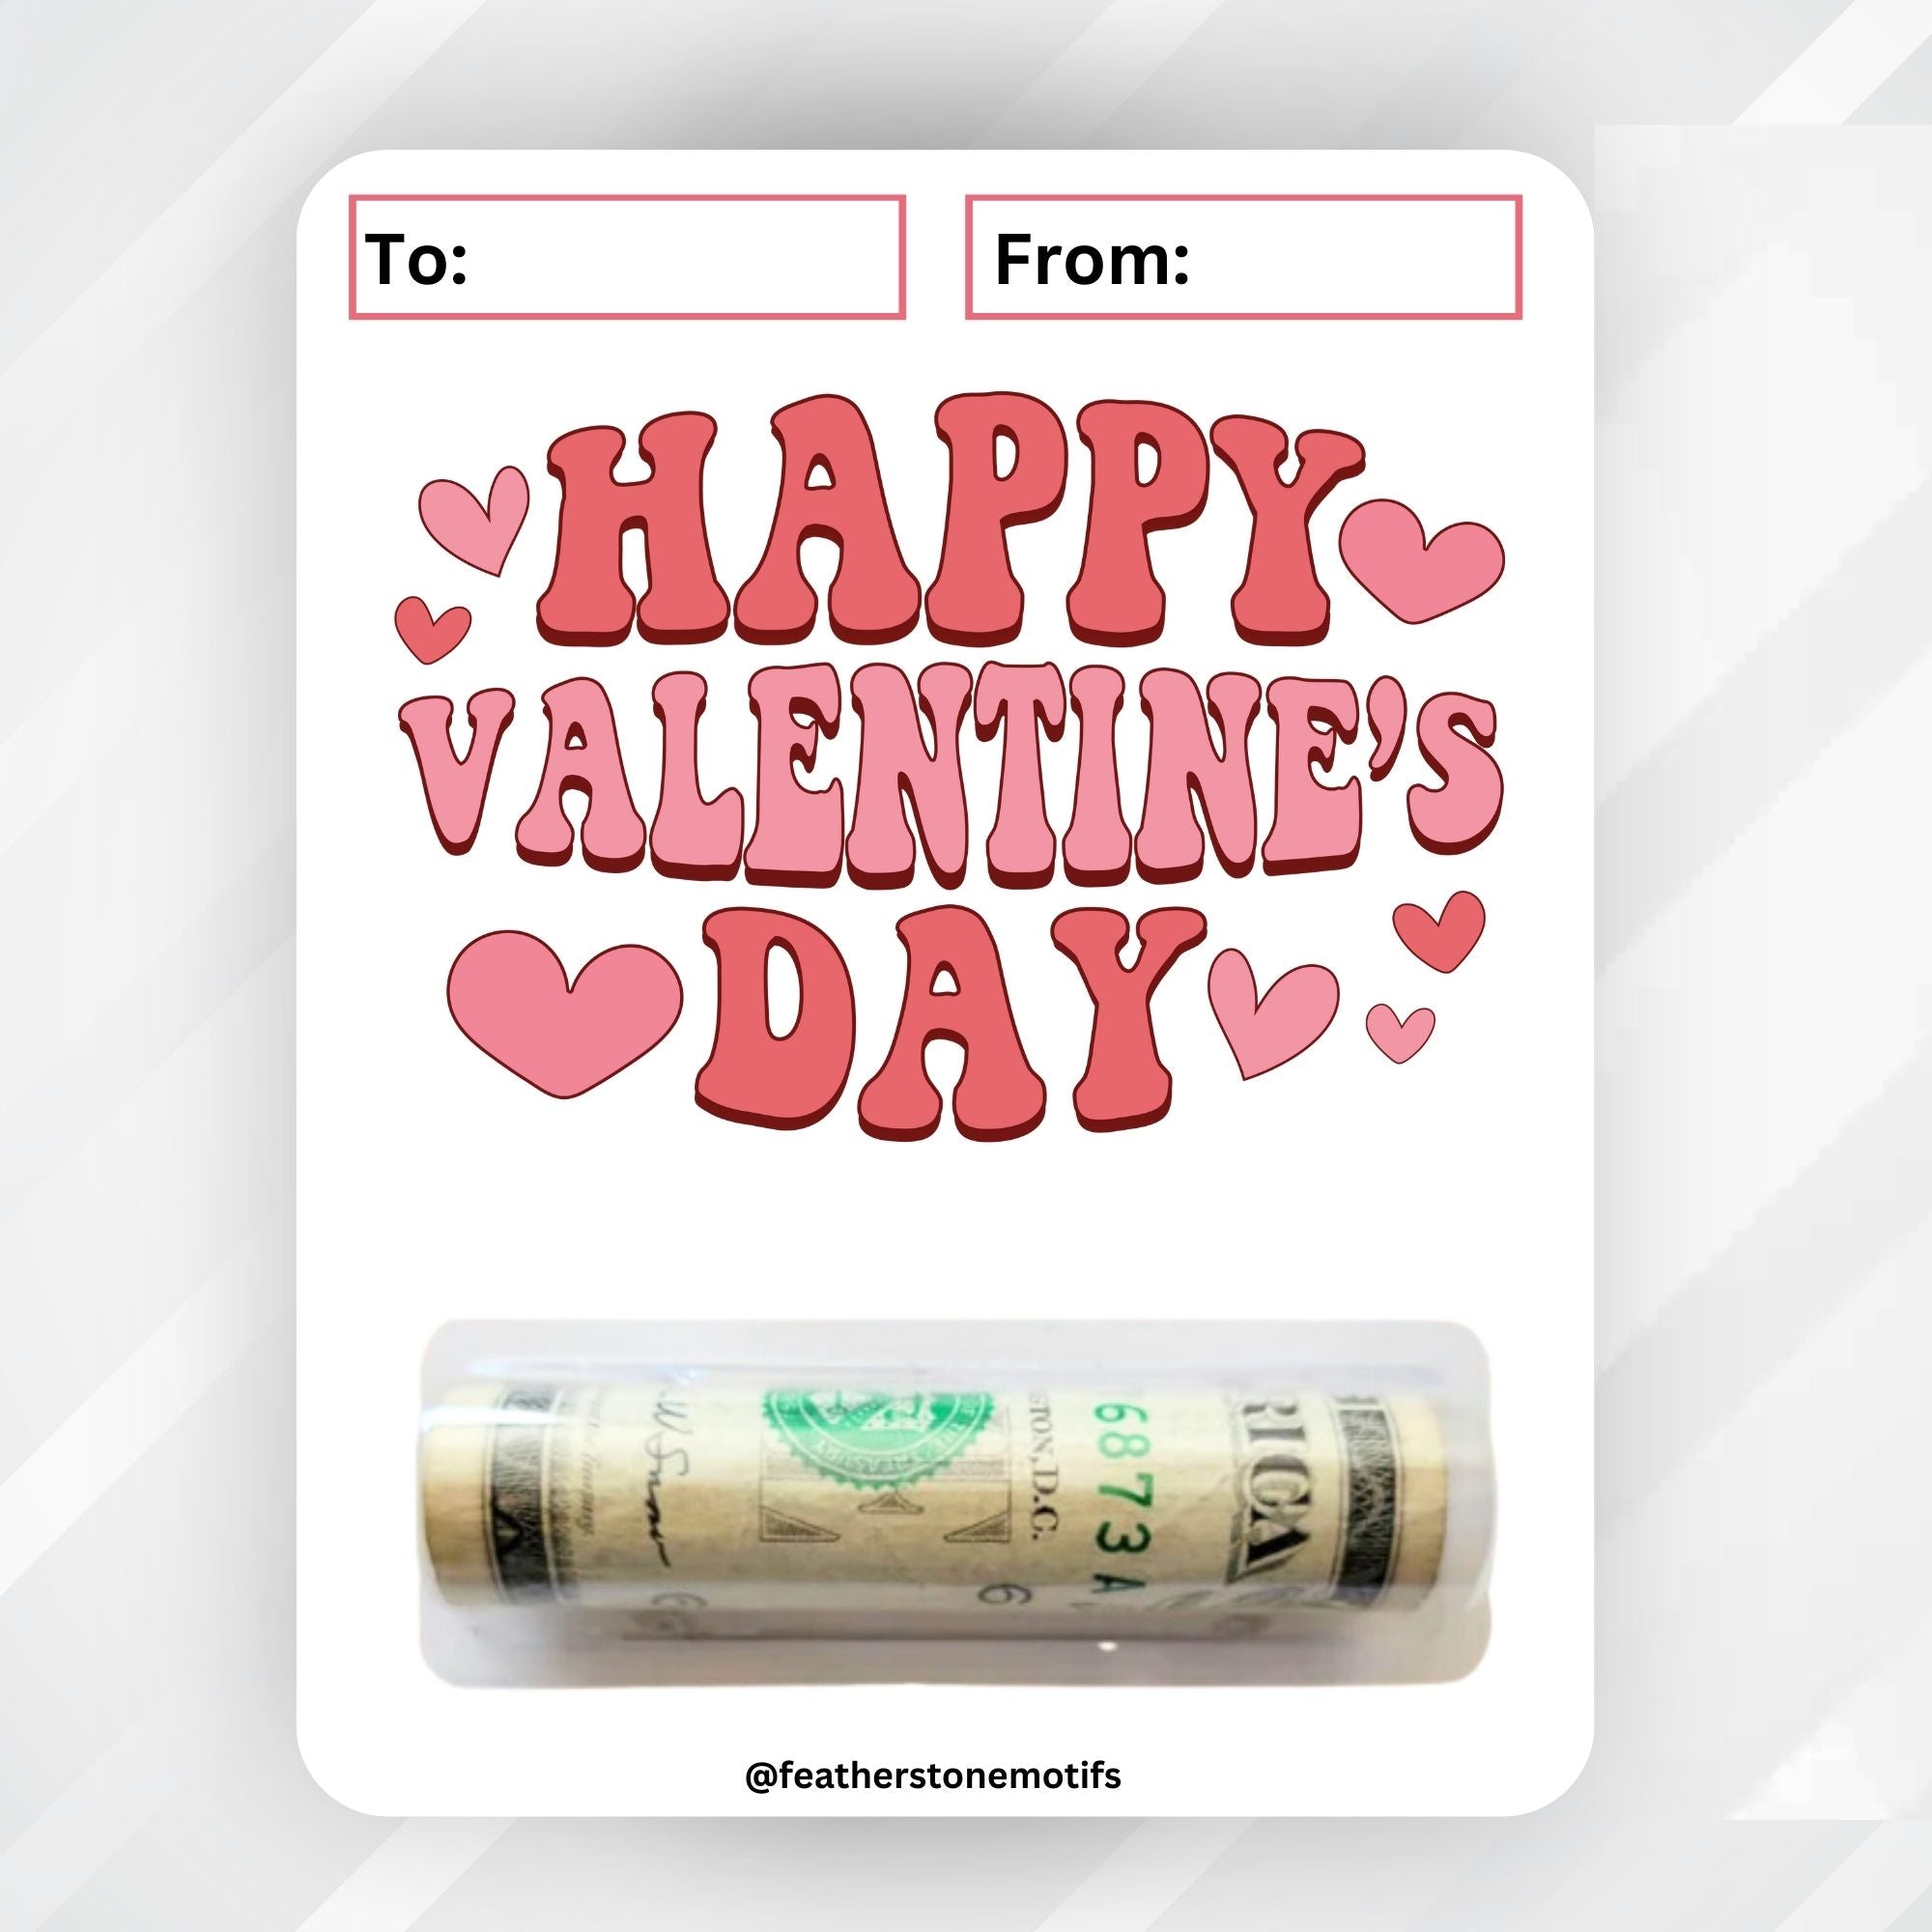 This image shows the money tube attached to the Happy Valentine's Day Valentine Money Card.